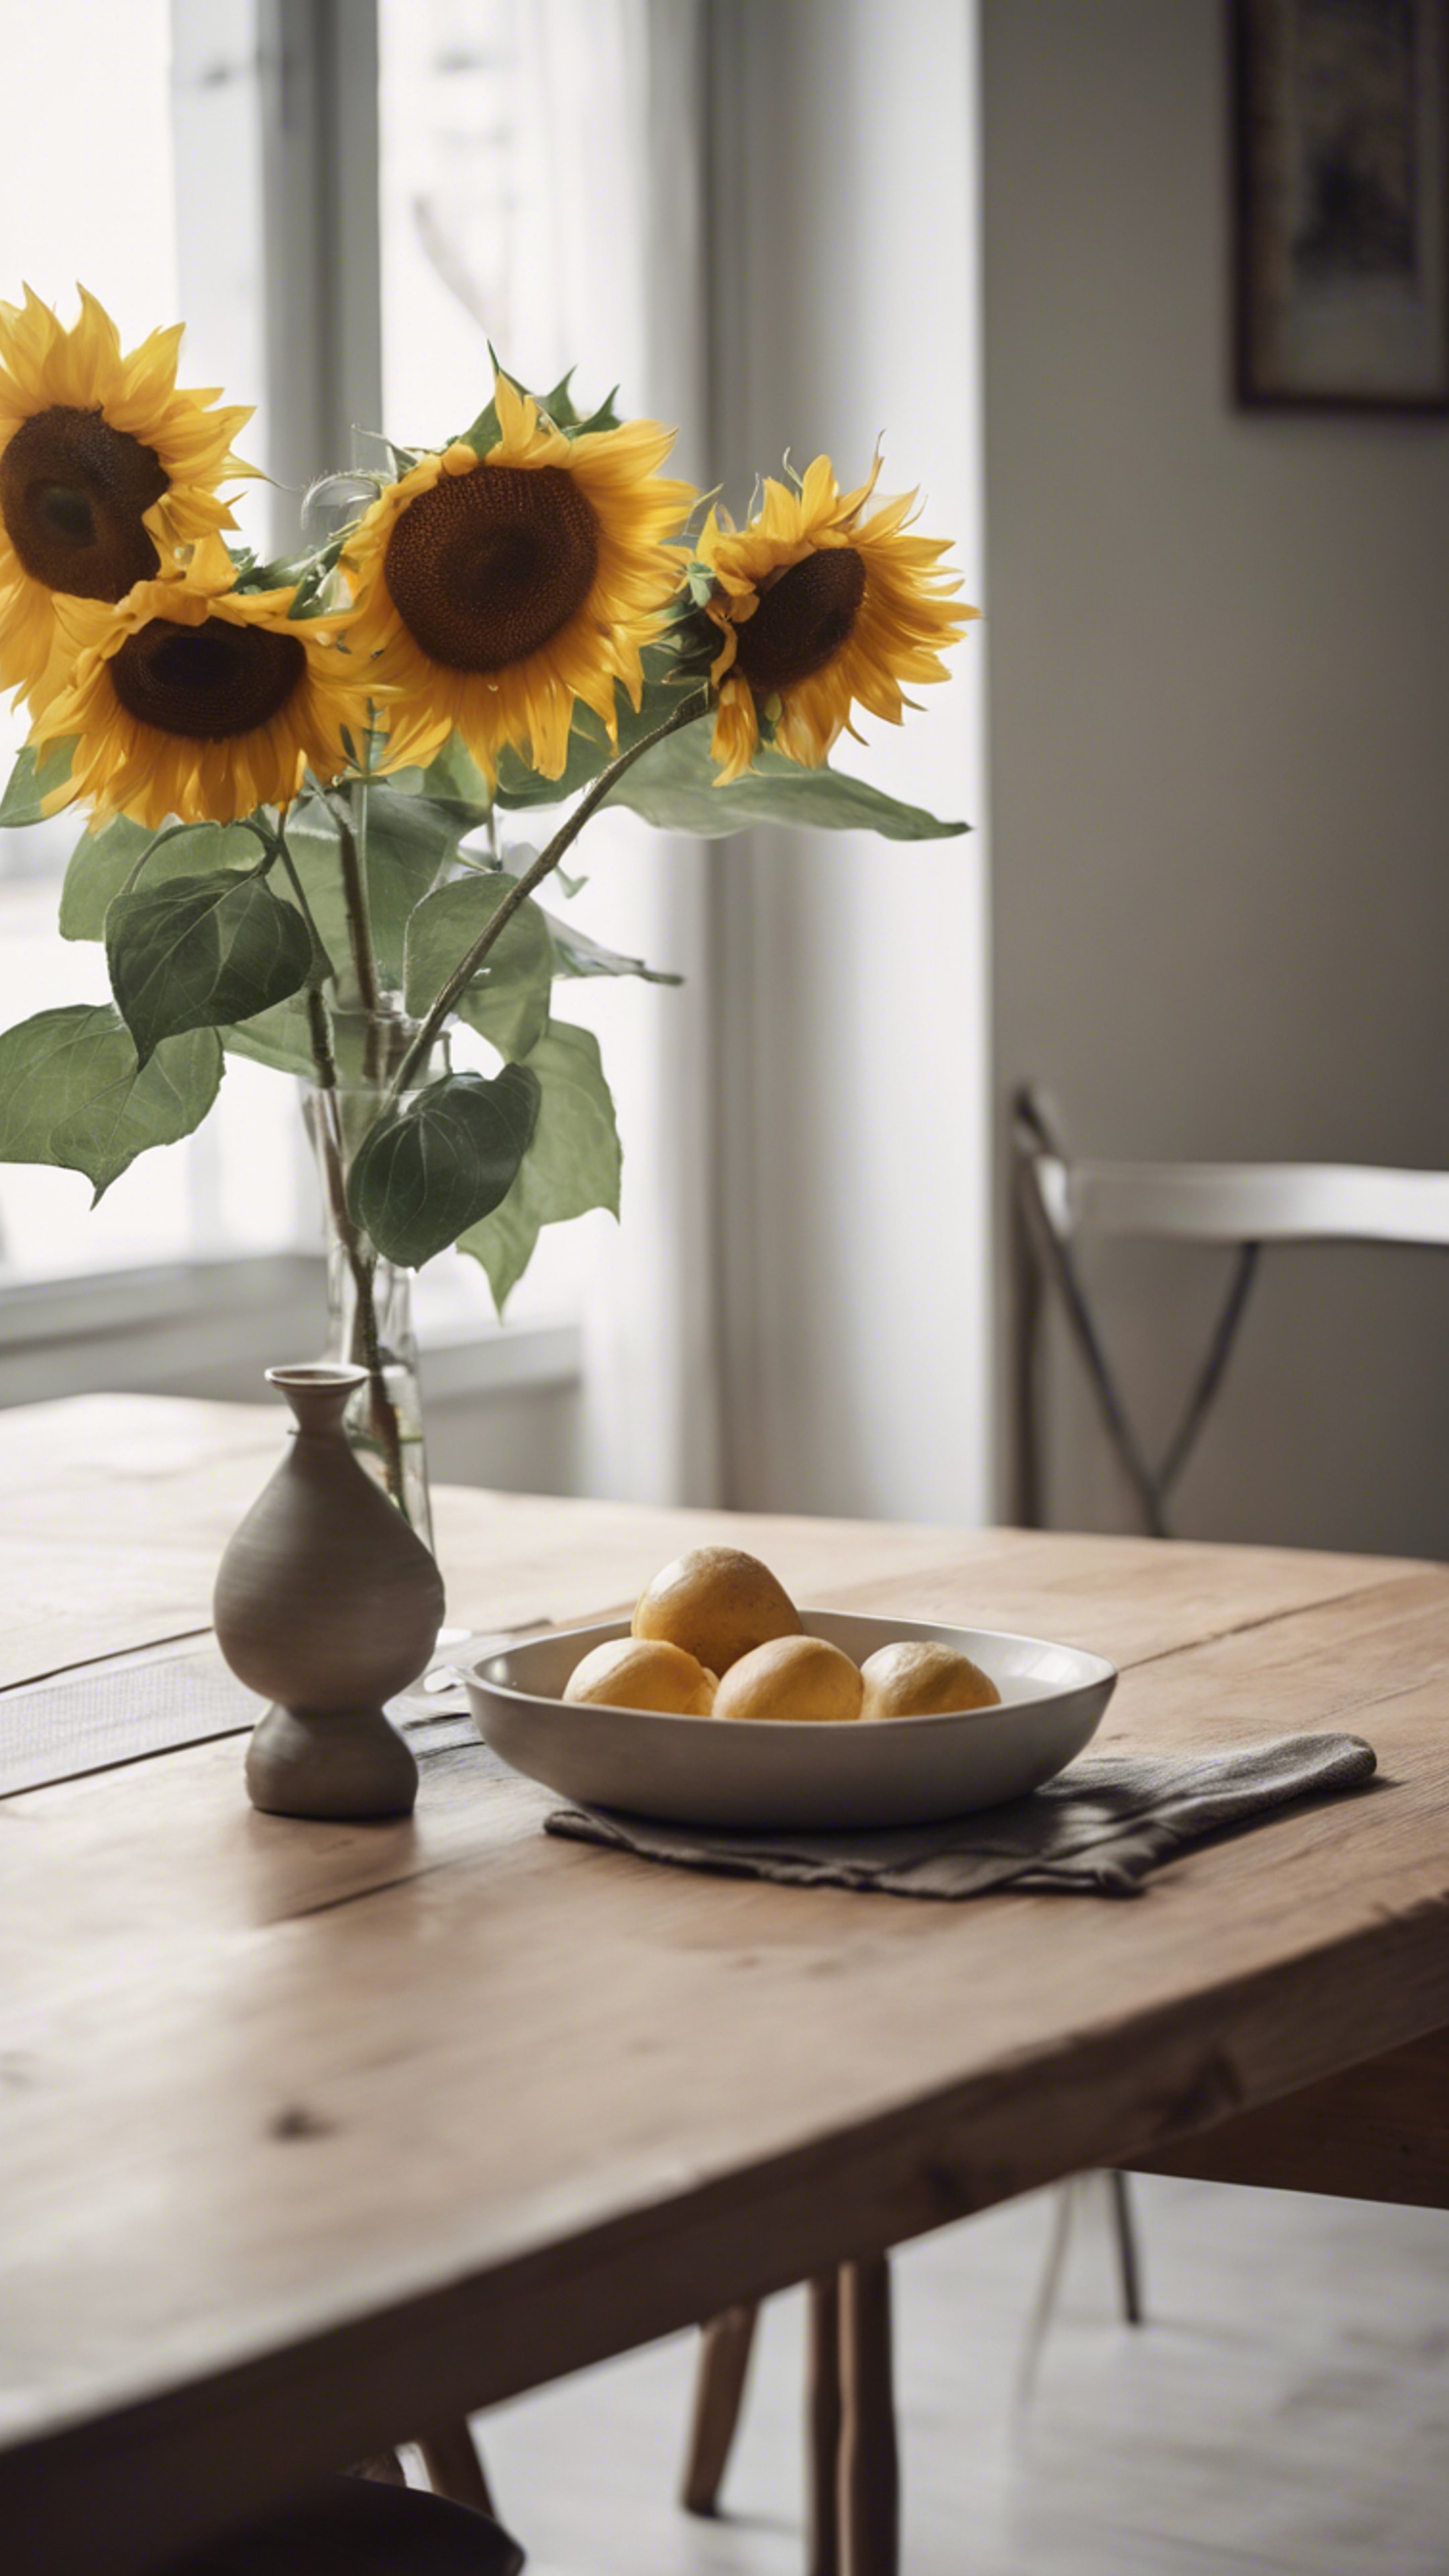 A minimalist dining area with a wooden table, set with simple china and a vase of sunflowers. Tapeta[7db5290c1b5a4d25ba08]